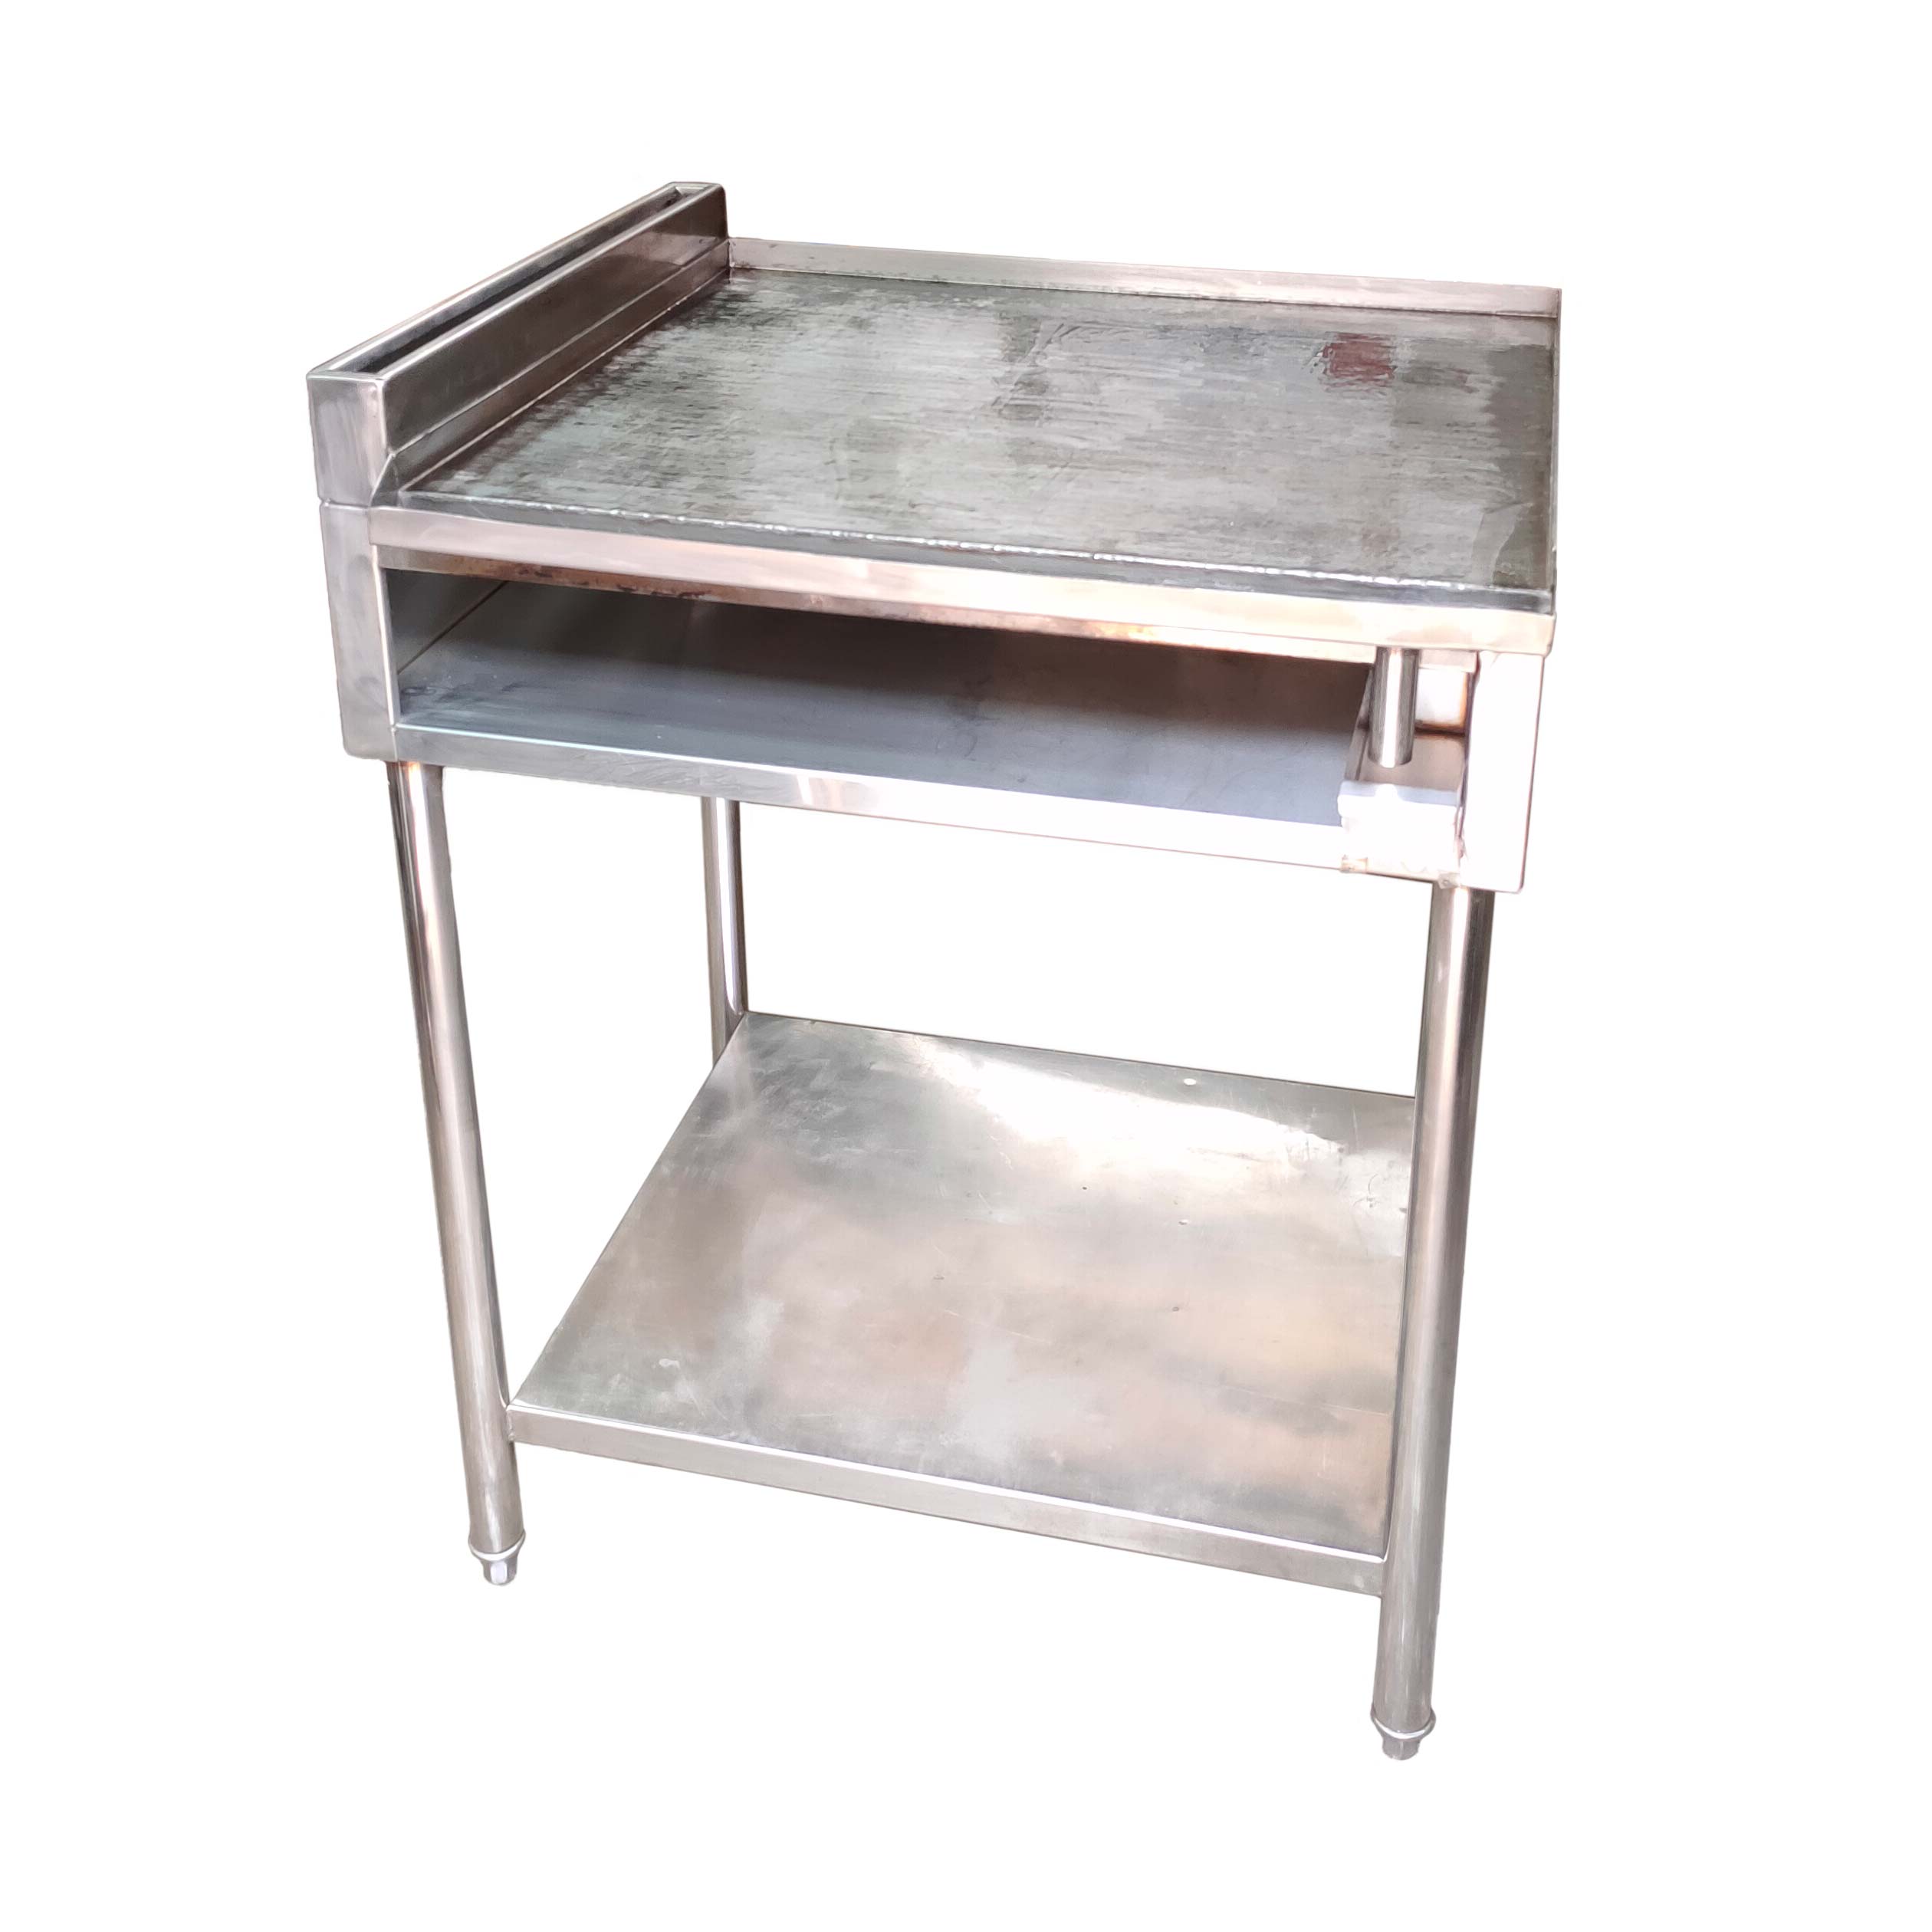 Hot Plate Griddle with Bottom Shelves